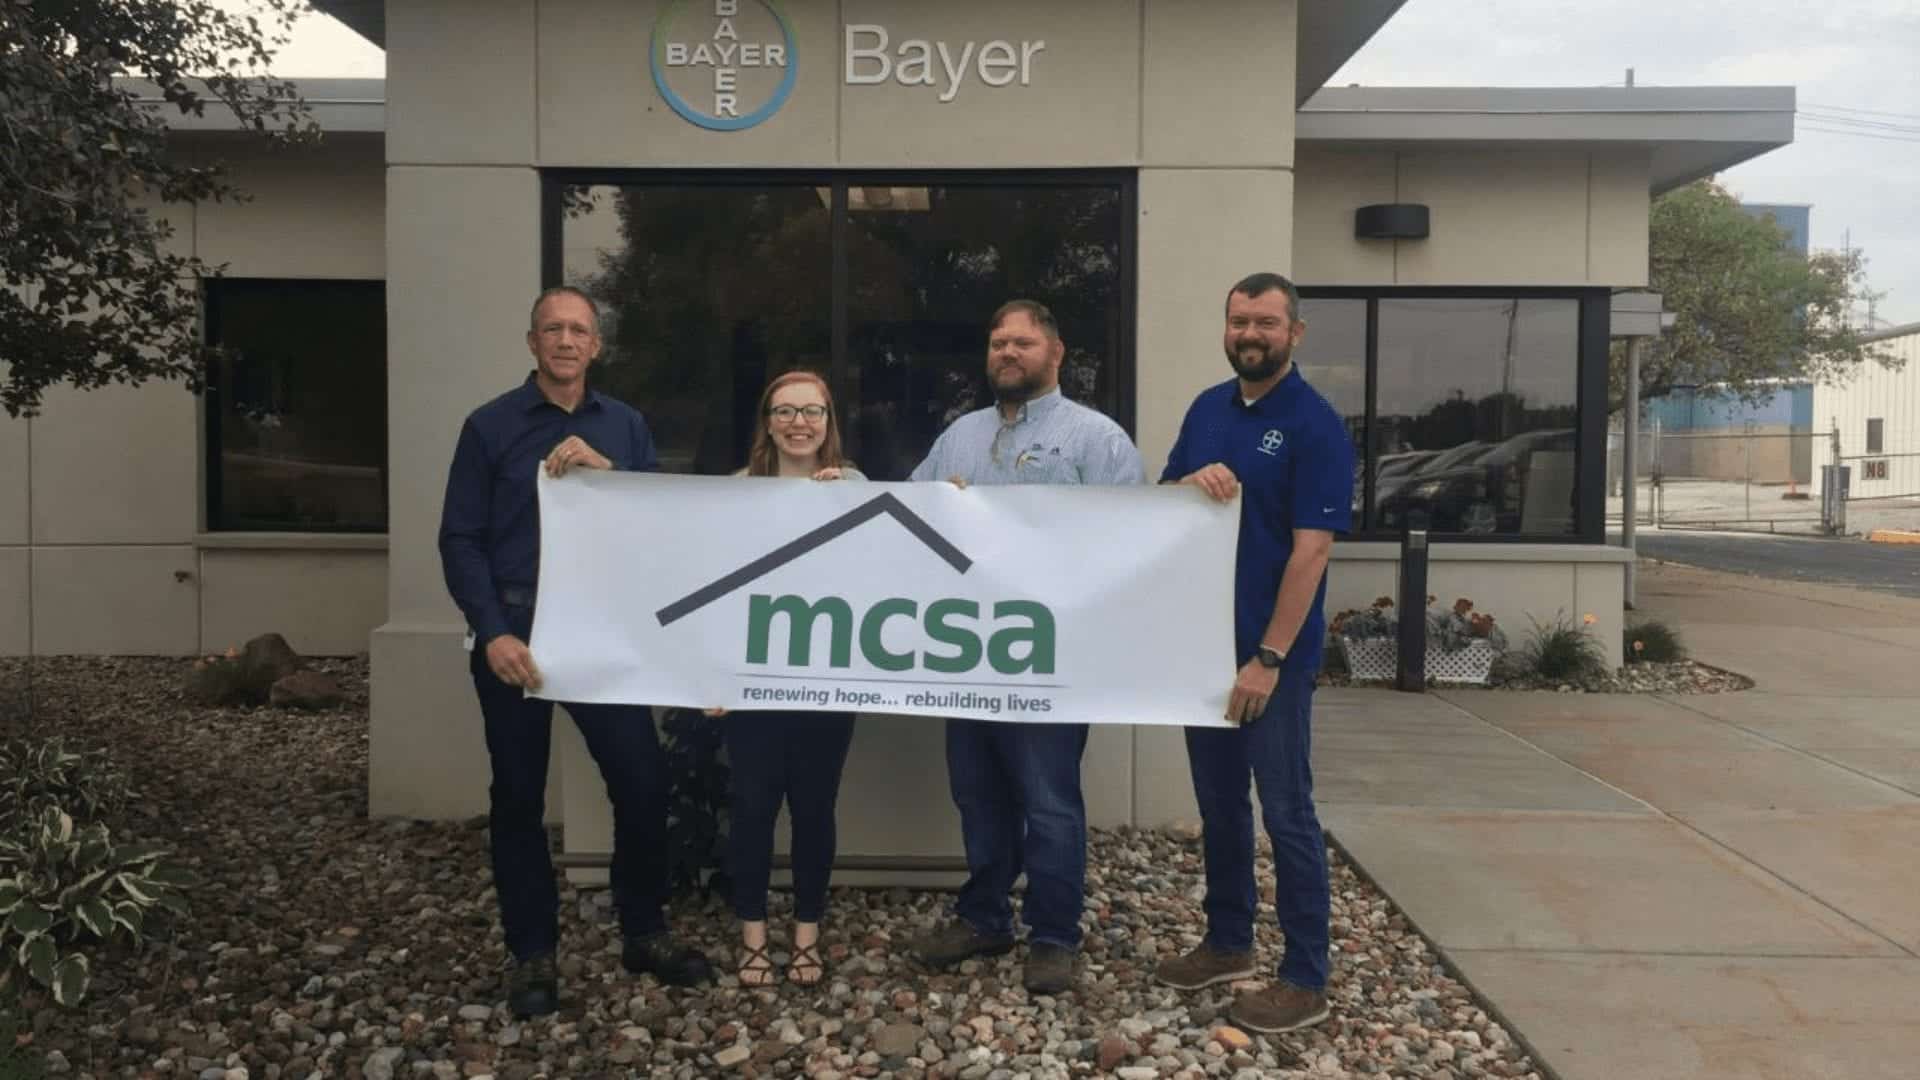 MCSA receives $7,500 grant from Bayer Fund